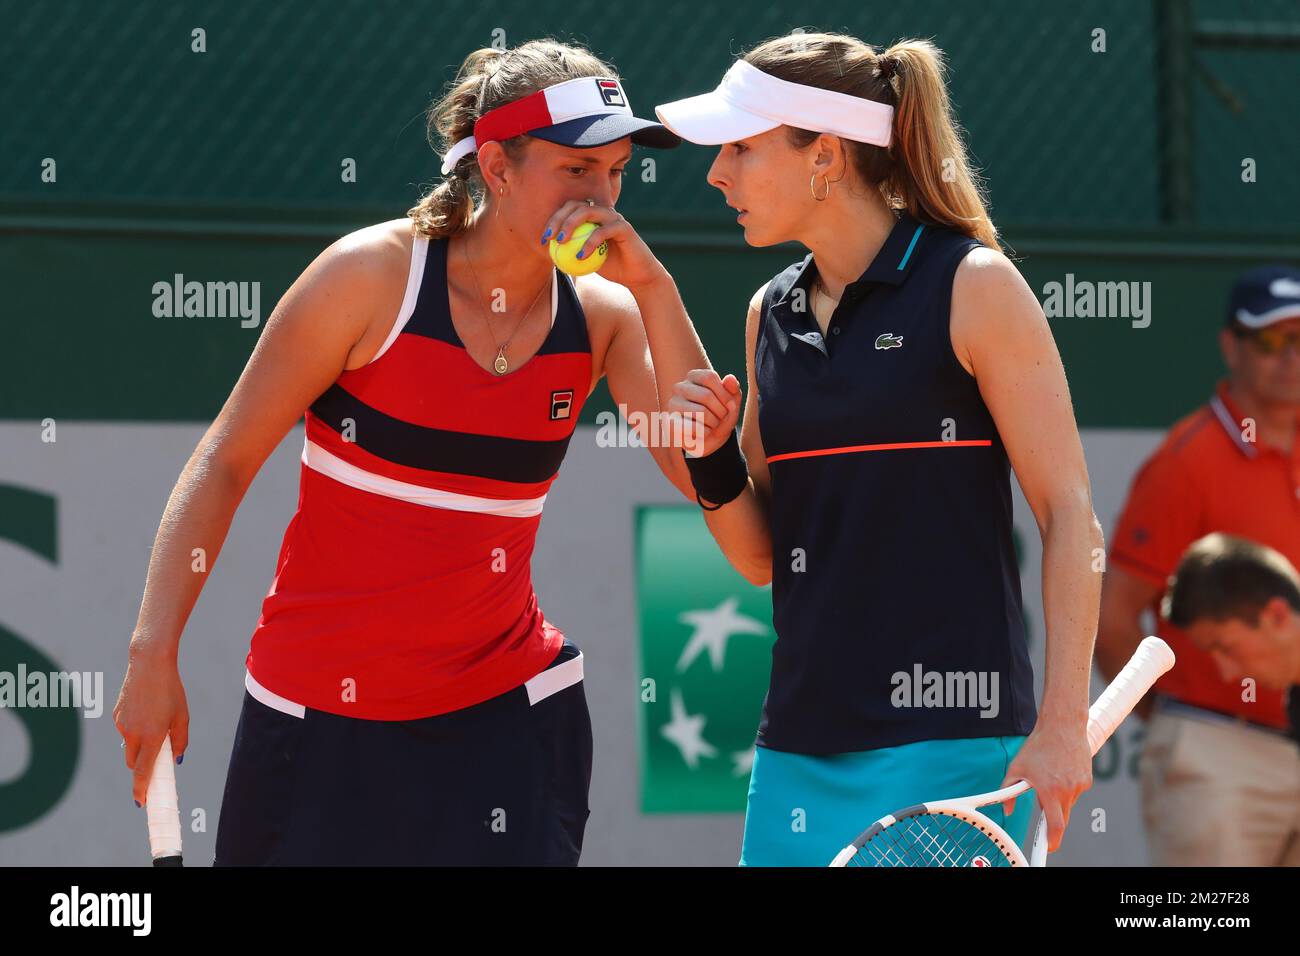 Belgian Elise Mertens and French Alize Cornet pictured during a doubles tennis game between Belgian Elise Mertens and French Alize Cornet versus US Bethanie Mattek-Sands and Czech Lucie Safarova, in the first round of the women's doubles tournament at the Roland Garros French Open tennis tournament, in Paris, France, Thursday 01 June 2017. The main table Roland Garros Grand Slam takes place from 29 May to 11 June 2017. BELGA PHOTO VIRGINIE LEFOUR Stock Photo